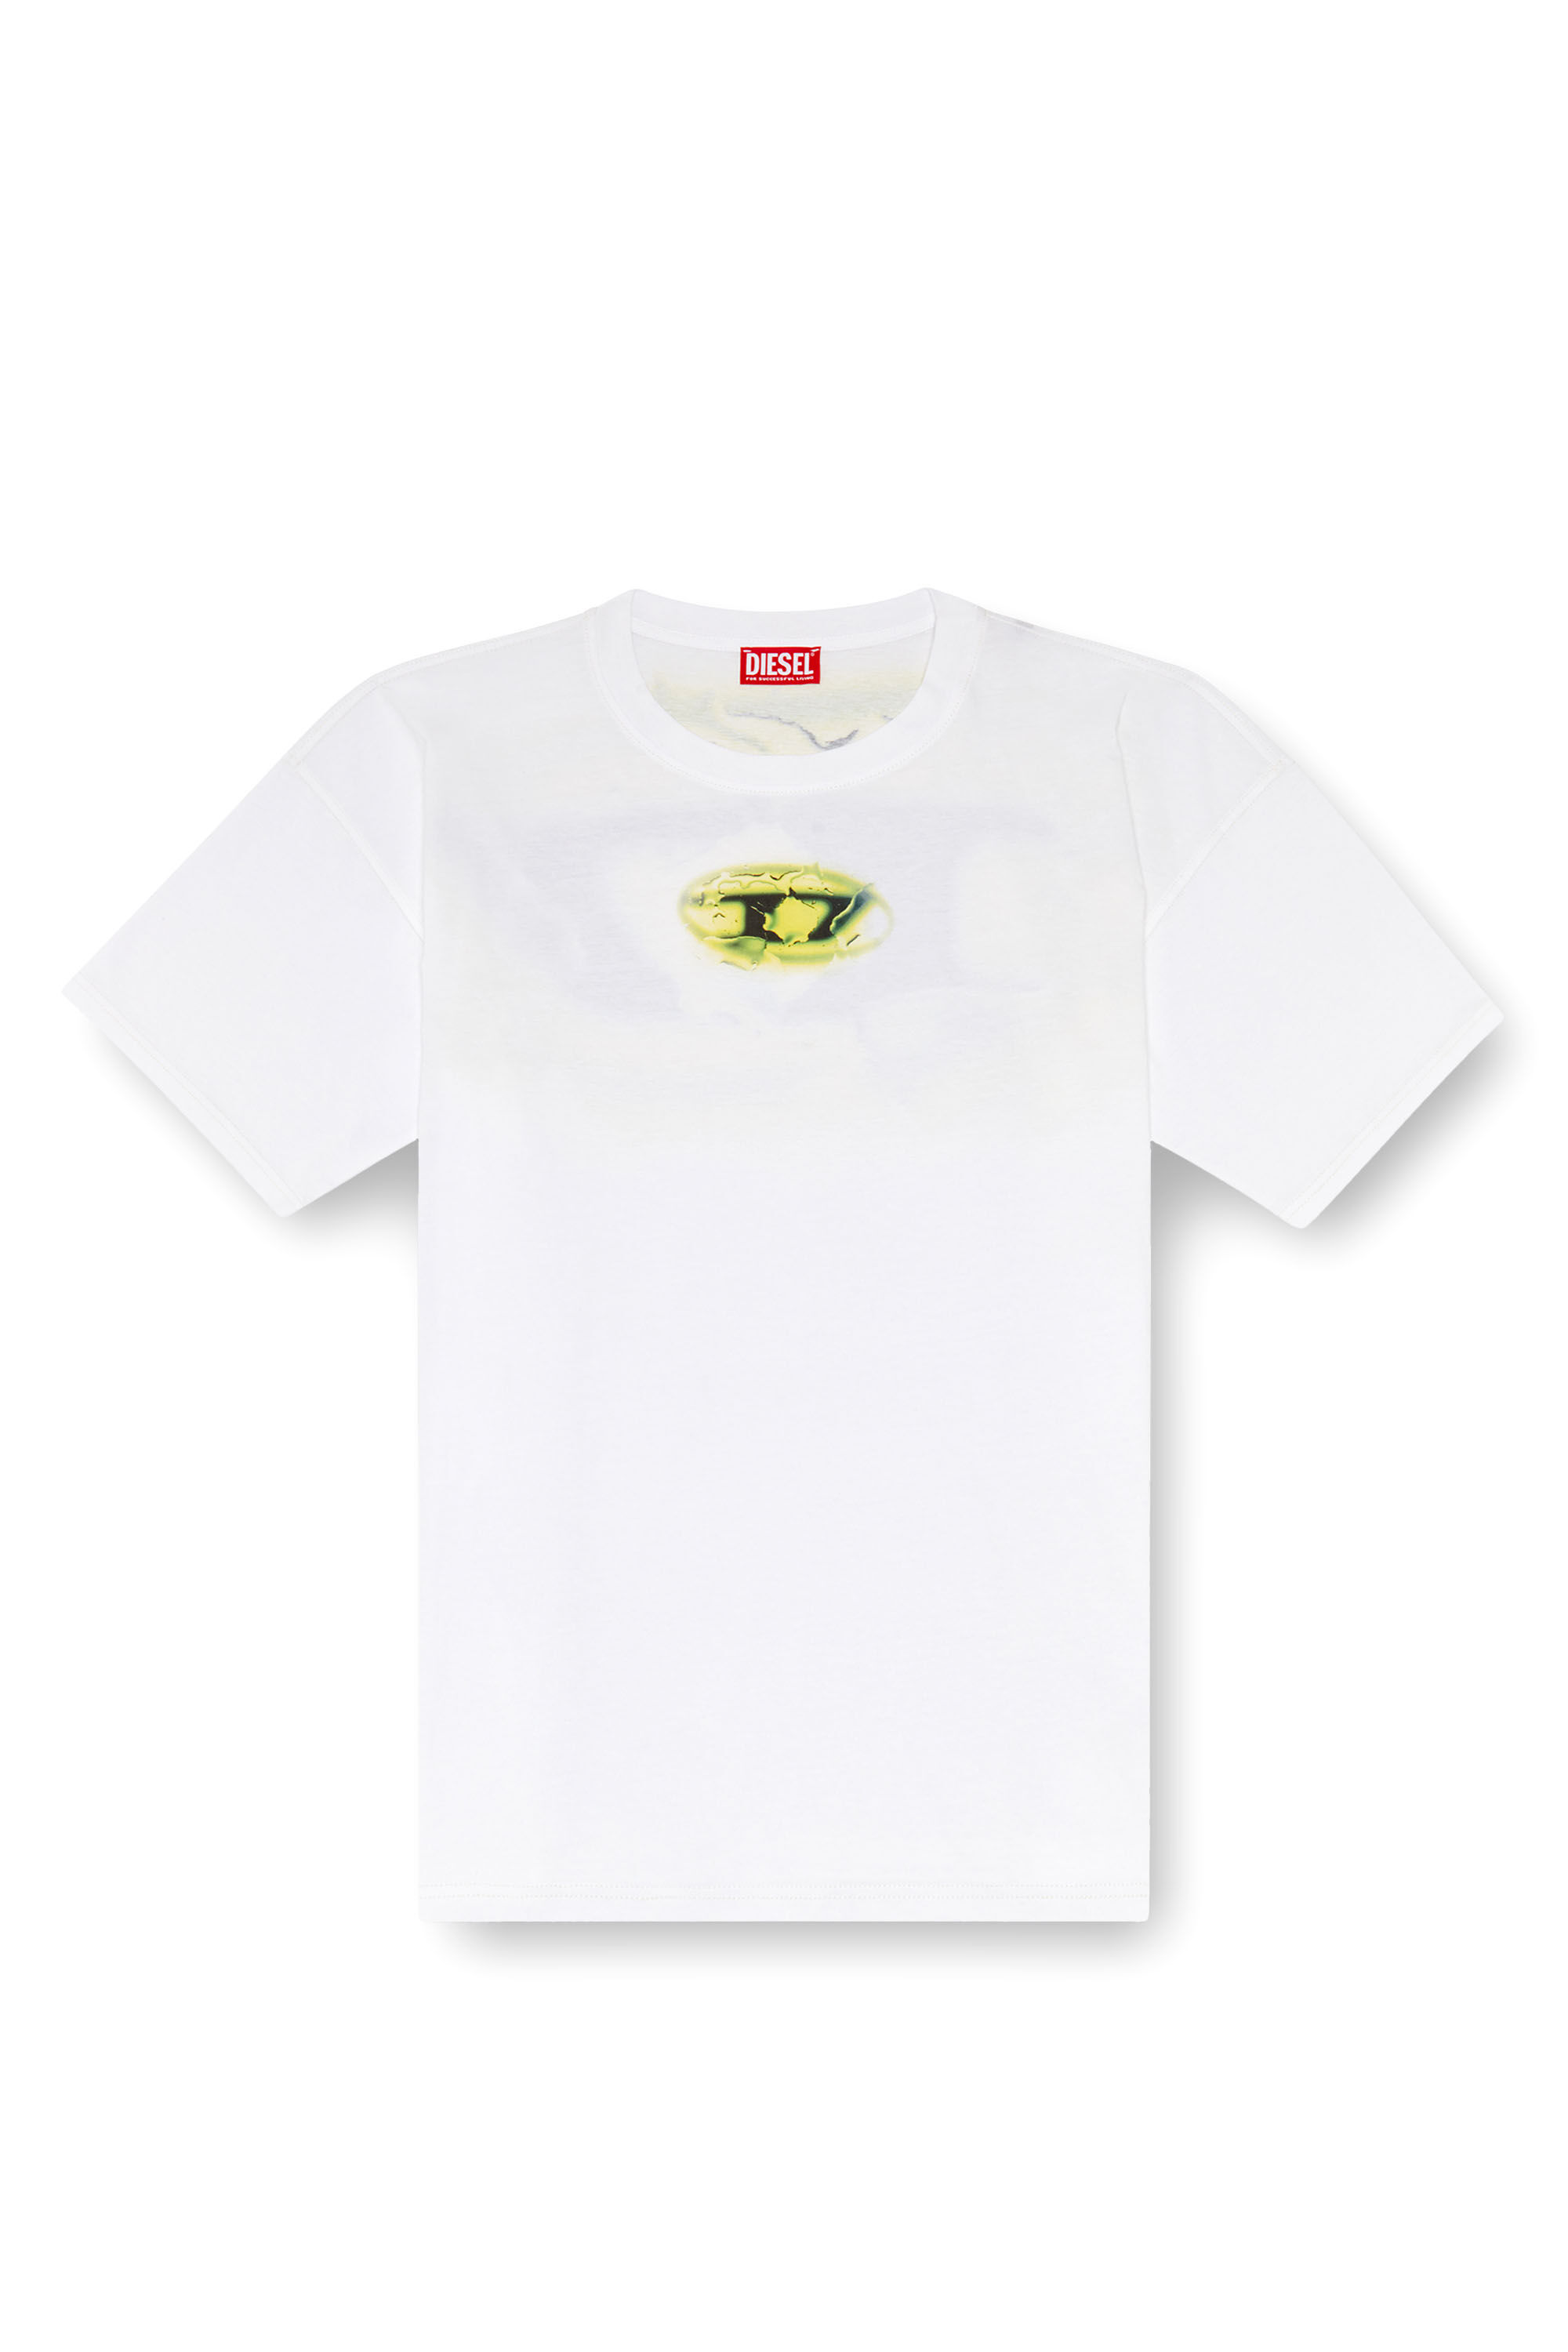 Diesel - T-BOXT-K3, Man T-shirt with glowing-effect logo in ToBeDefined - Image 2